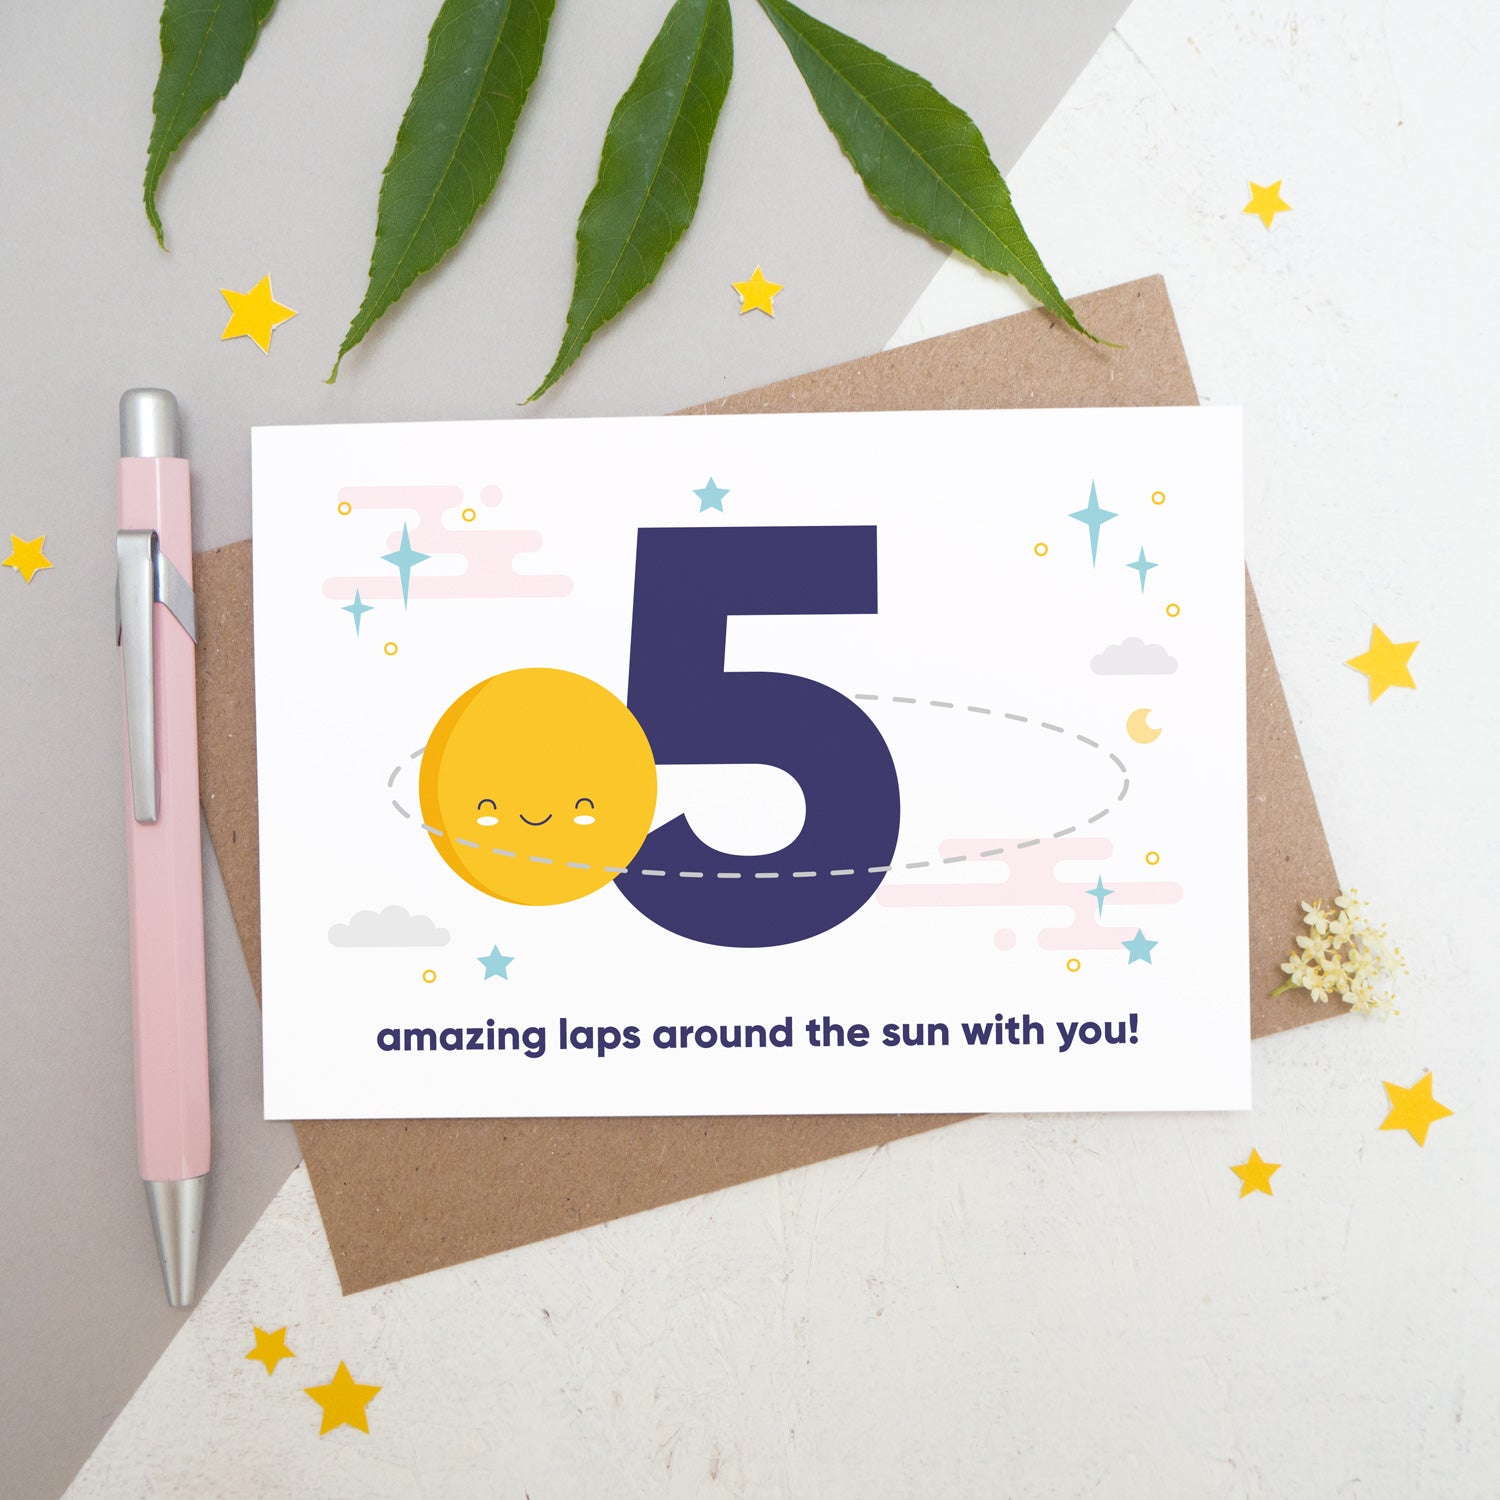 Laps around the sun anniversary card featuring a sun orbiting the number 5 surrounded by stars. Flat lay image shot on a white and grey background with some foliage, yellow stars and a pink pen.